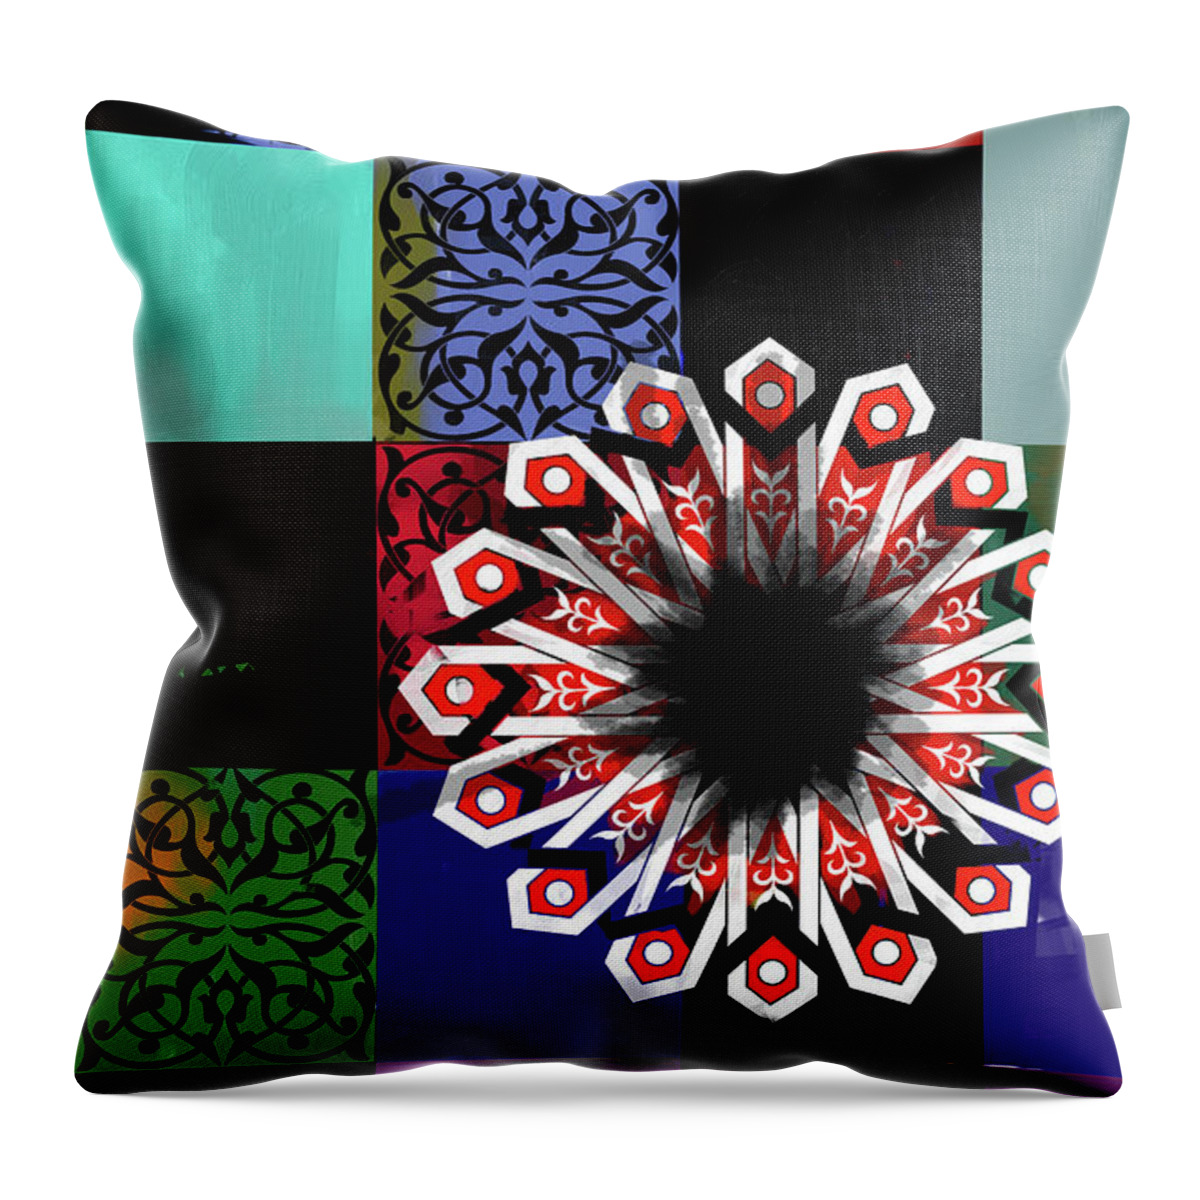 Motif Throw Pillow featuring the painting Islamic Motif V 444 4 by Mawra Tahreem